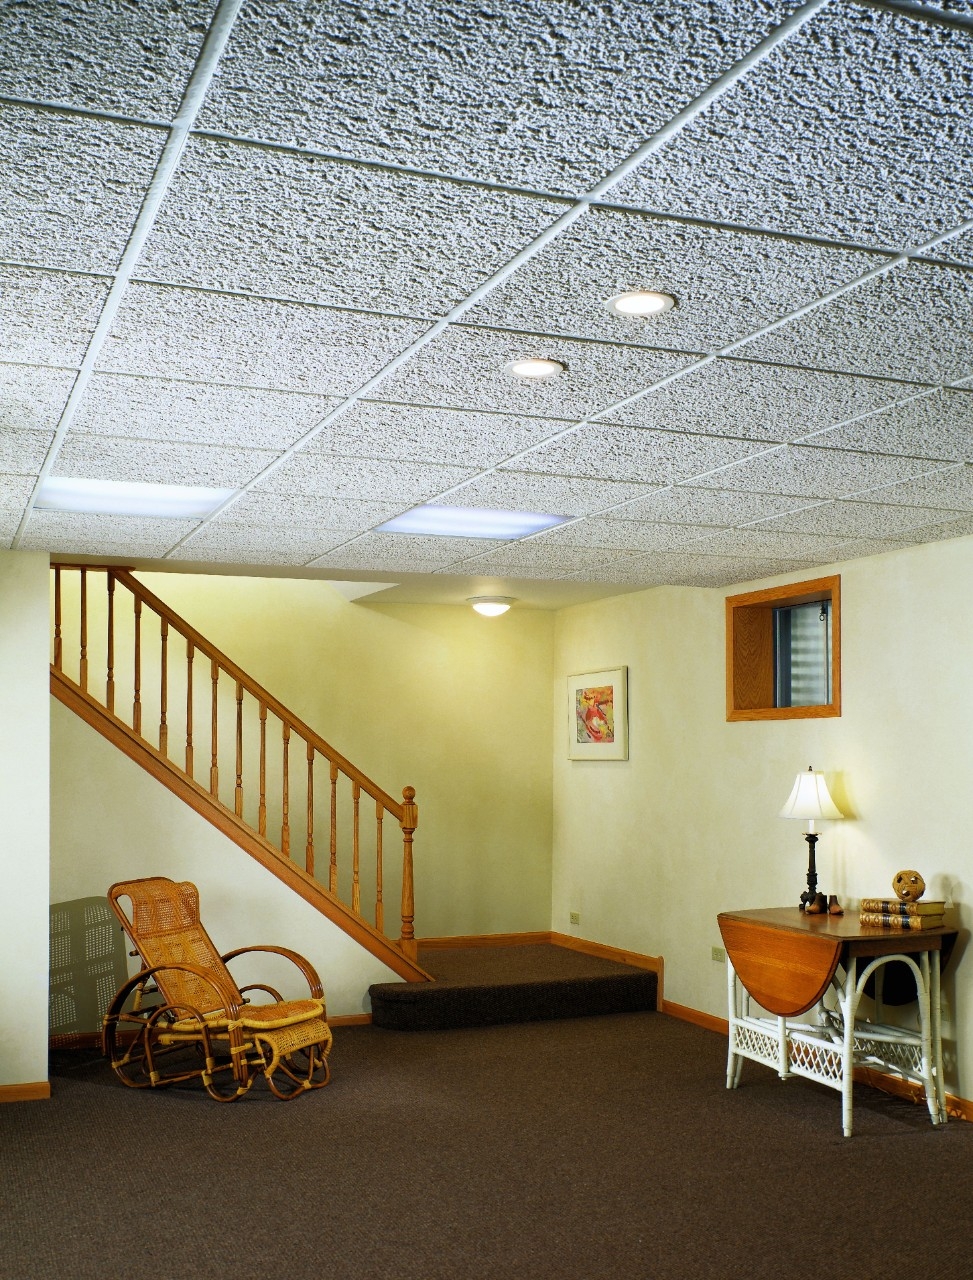 Stucco Over Ceiling Tiles Stucco Over Ceiling Tiles bpm select the premier building product search engine textured 973 X 1280